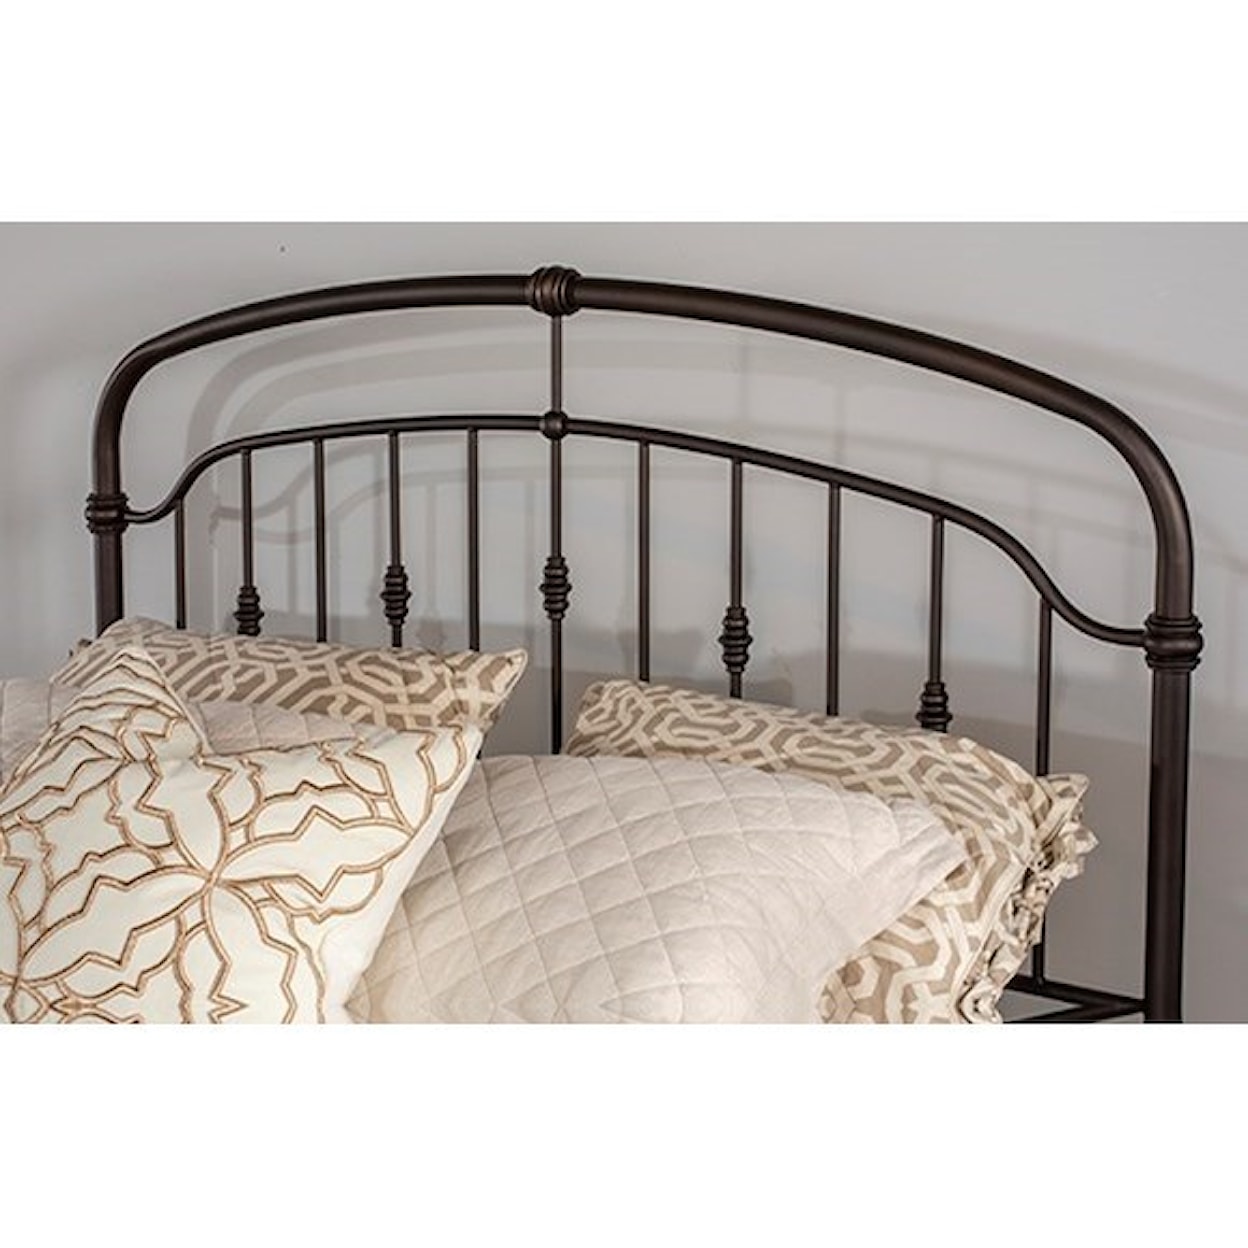 Hillsdale Pearson Metal King Bed